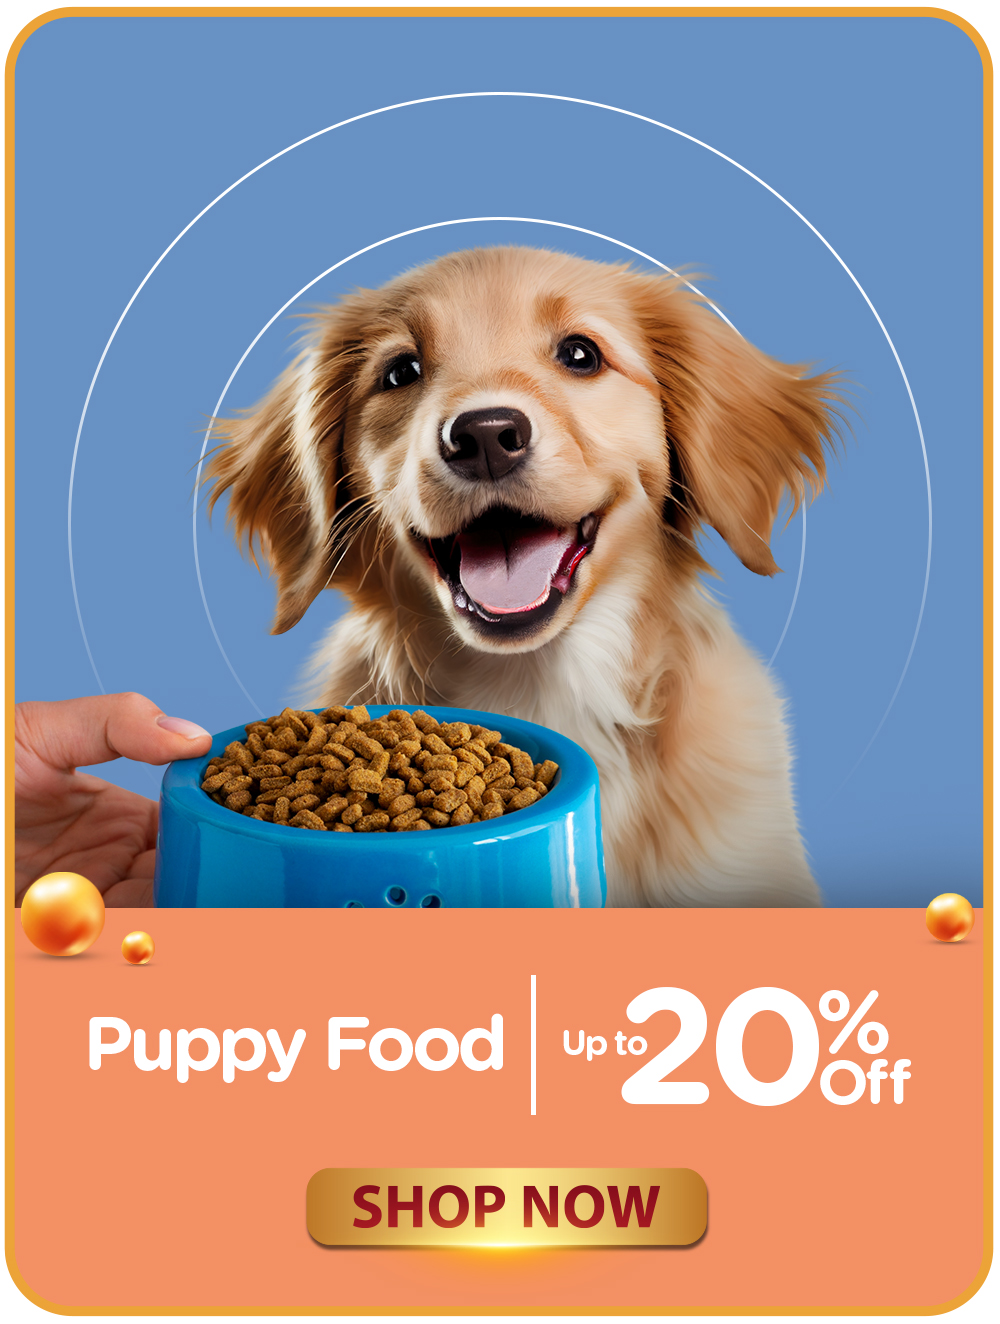 12 - CATEGORY BANNERS - PUPPY FOOD